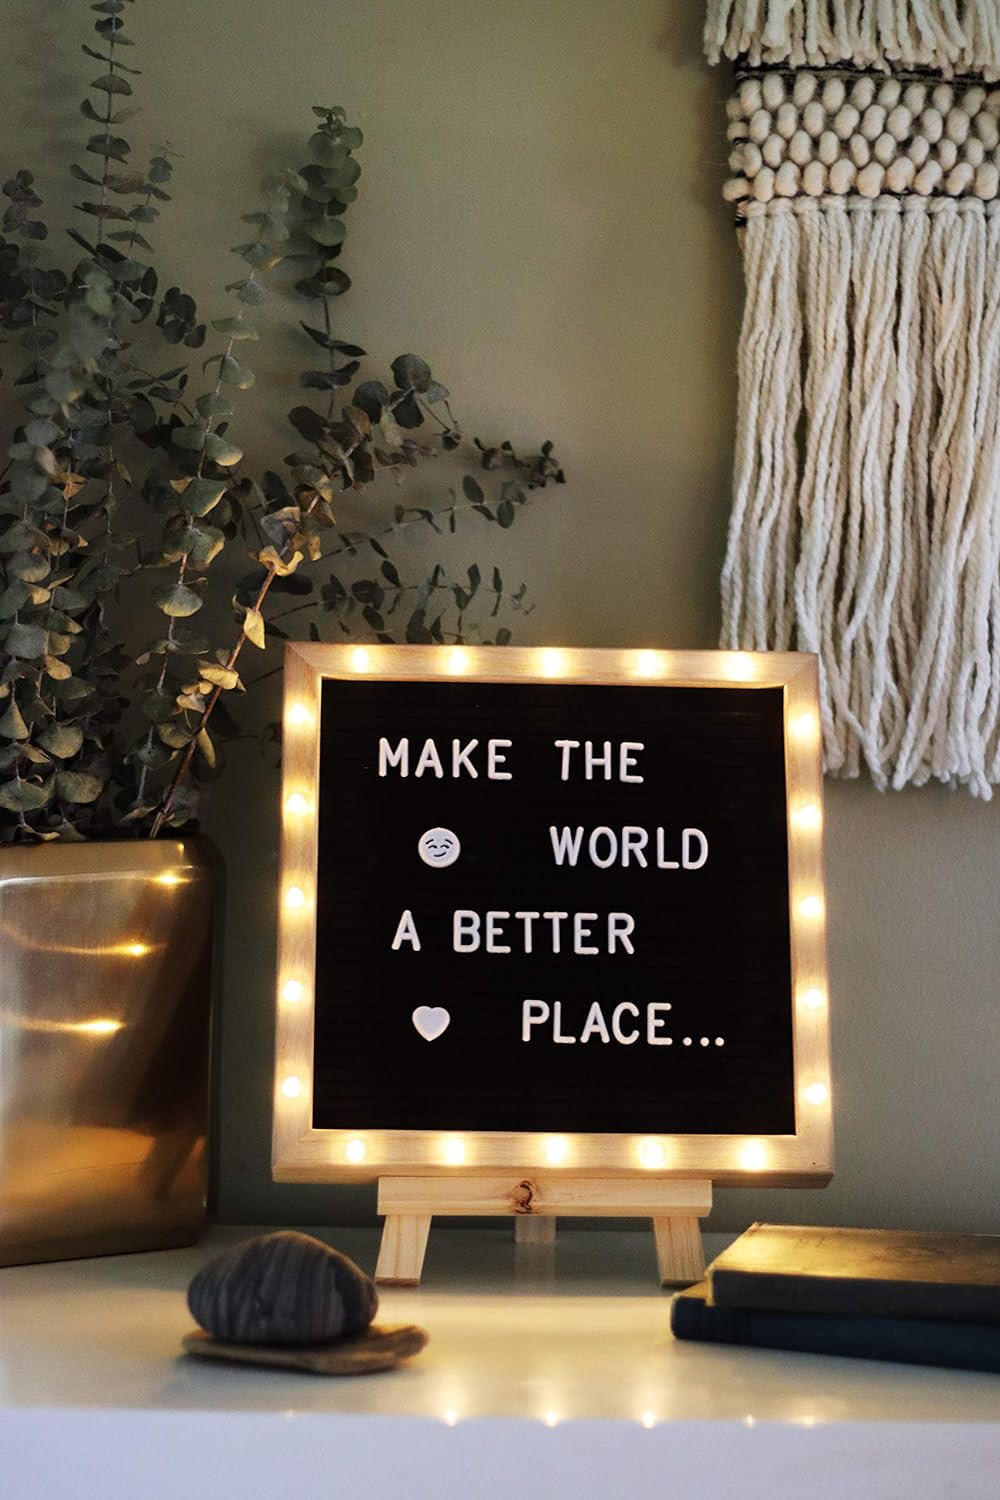 Letter Board The Original Black Felt Board with Stand, Built-in LED Lights 10 x 10